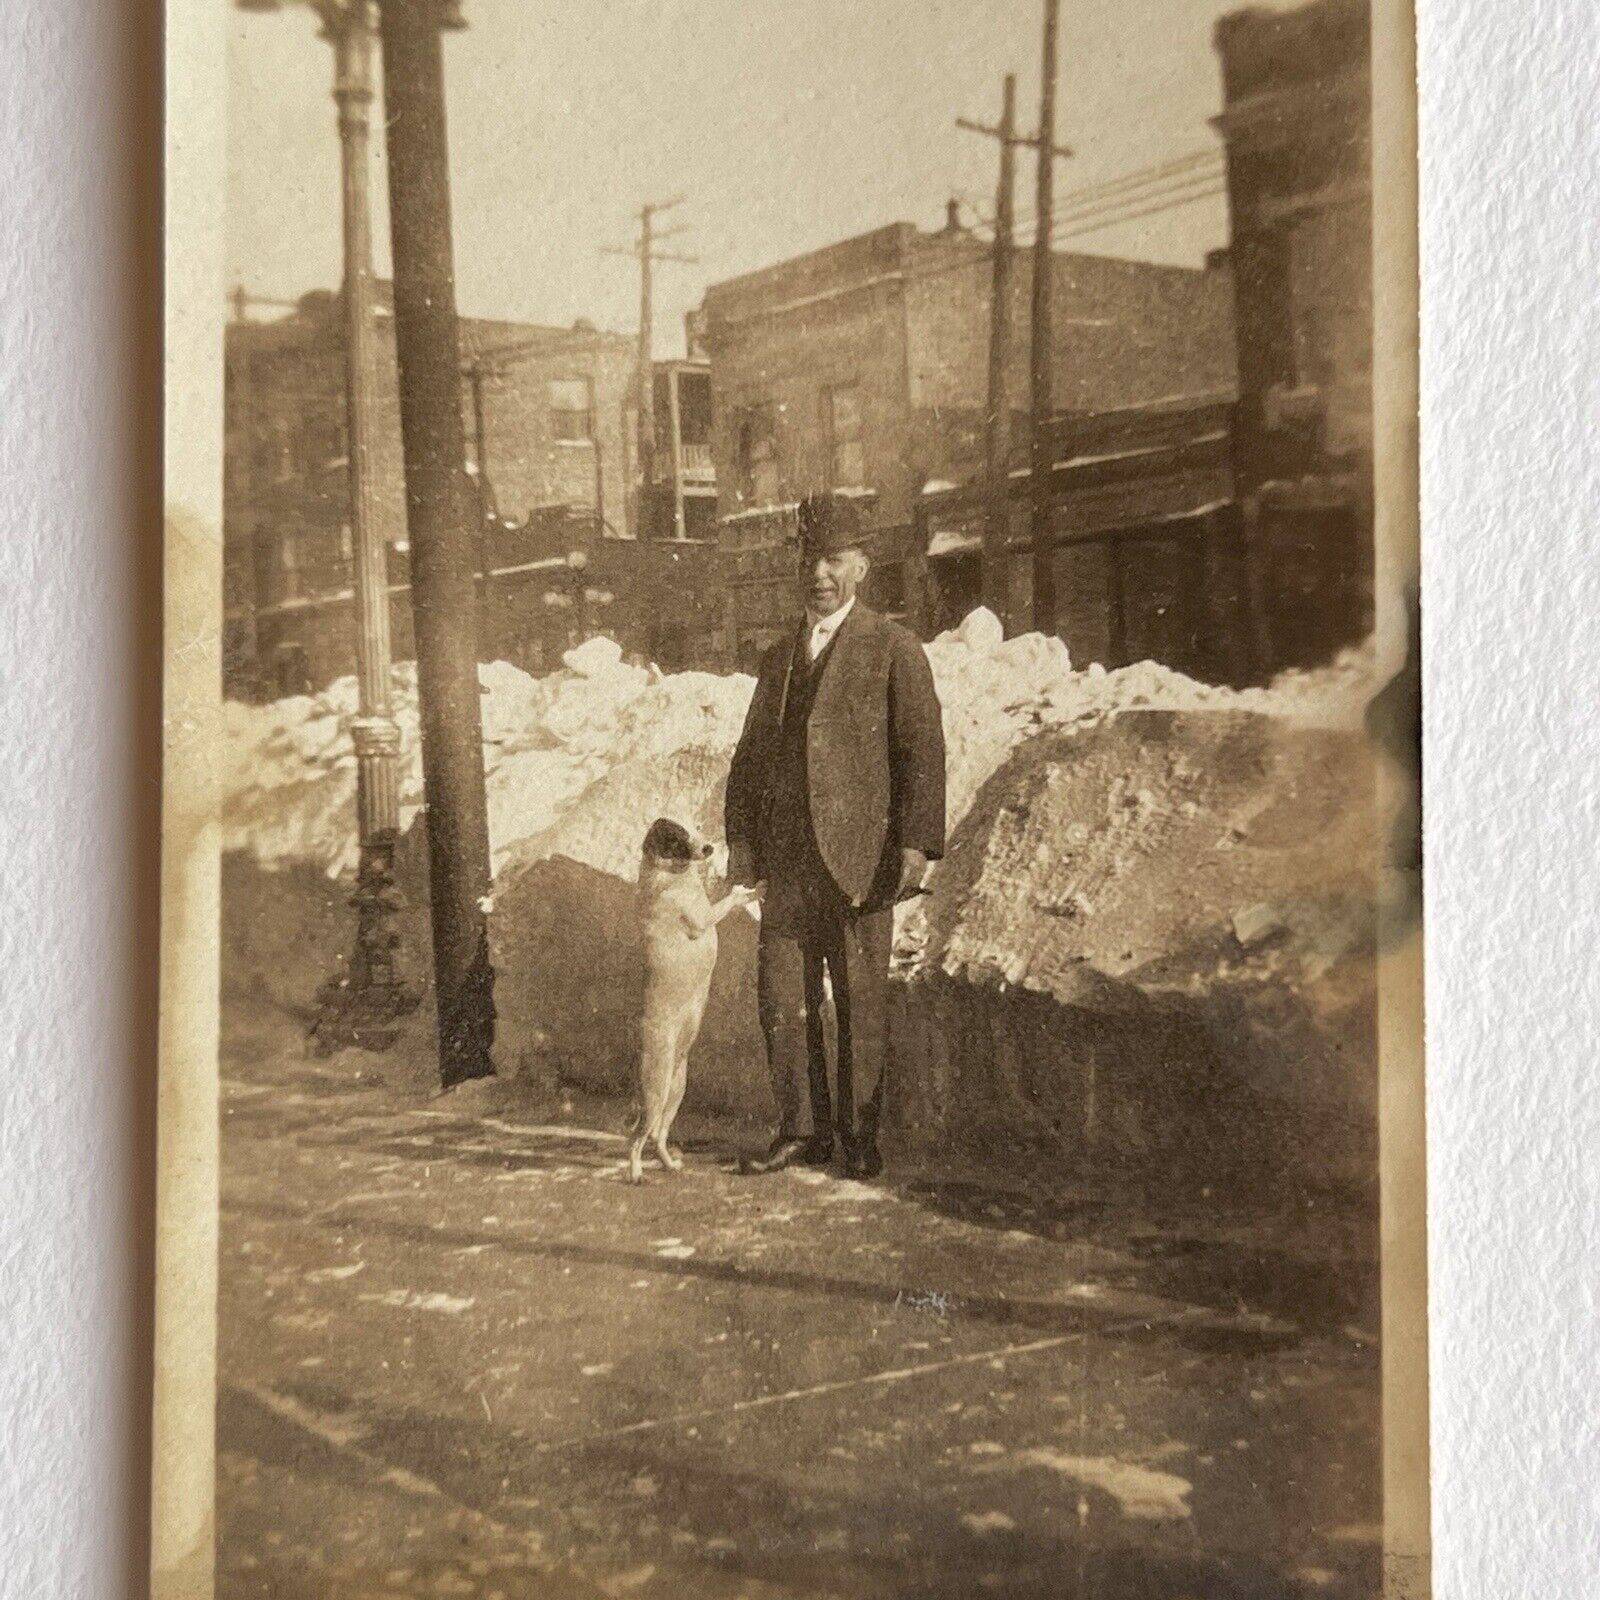 Antique Sepia Snapshot Photograph Man On Street With Dog Doing Trick Snow Odd